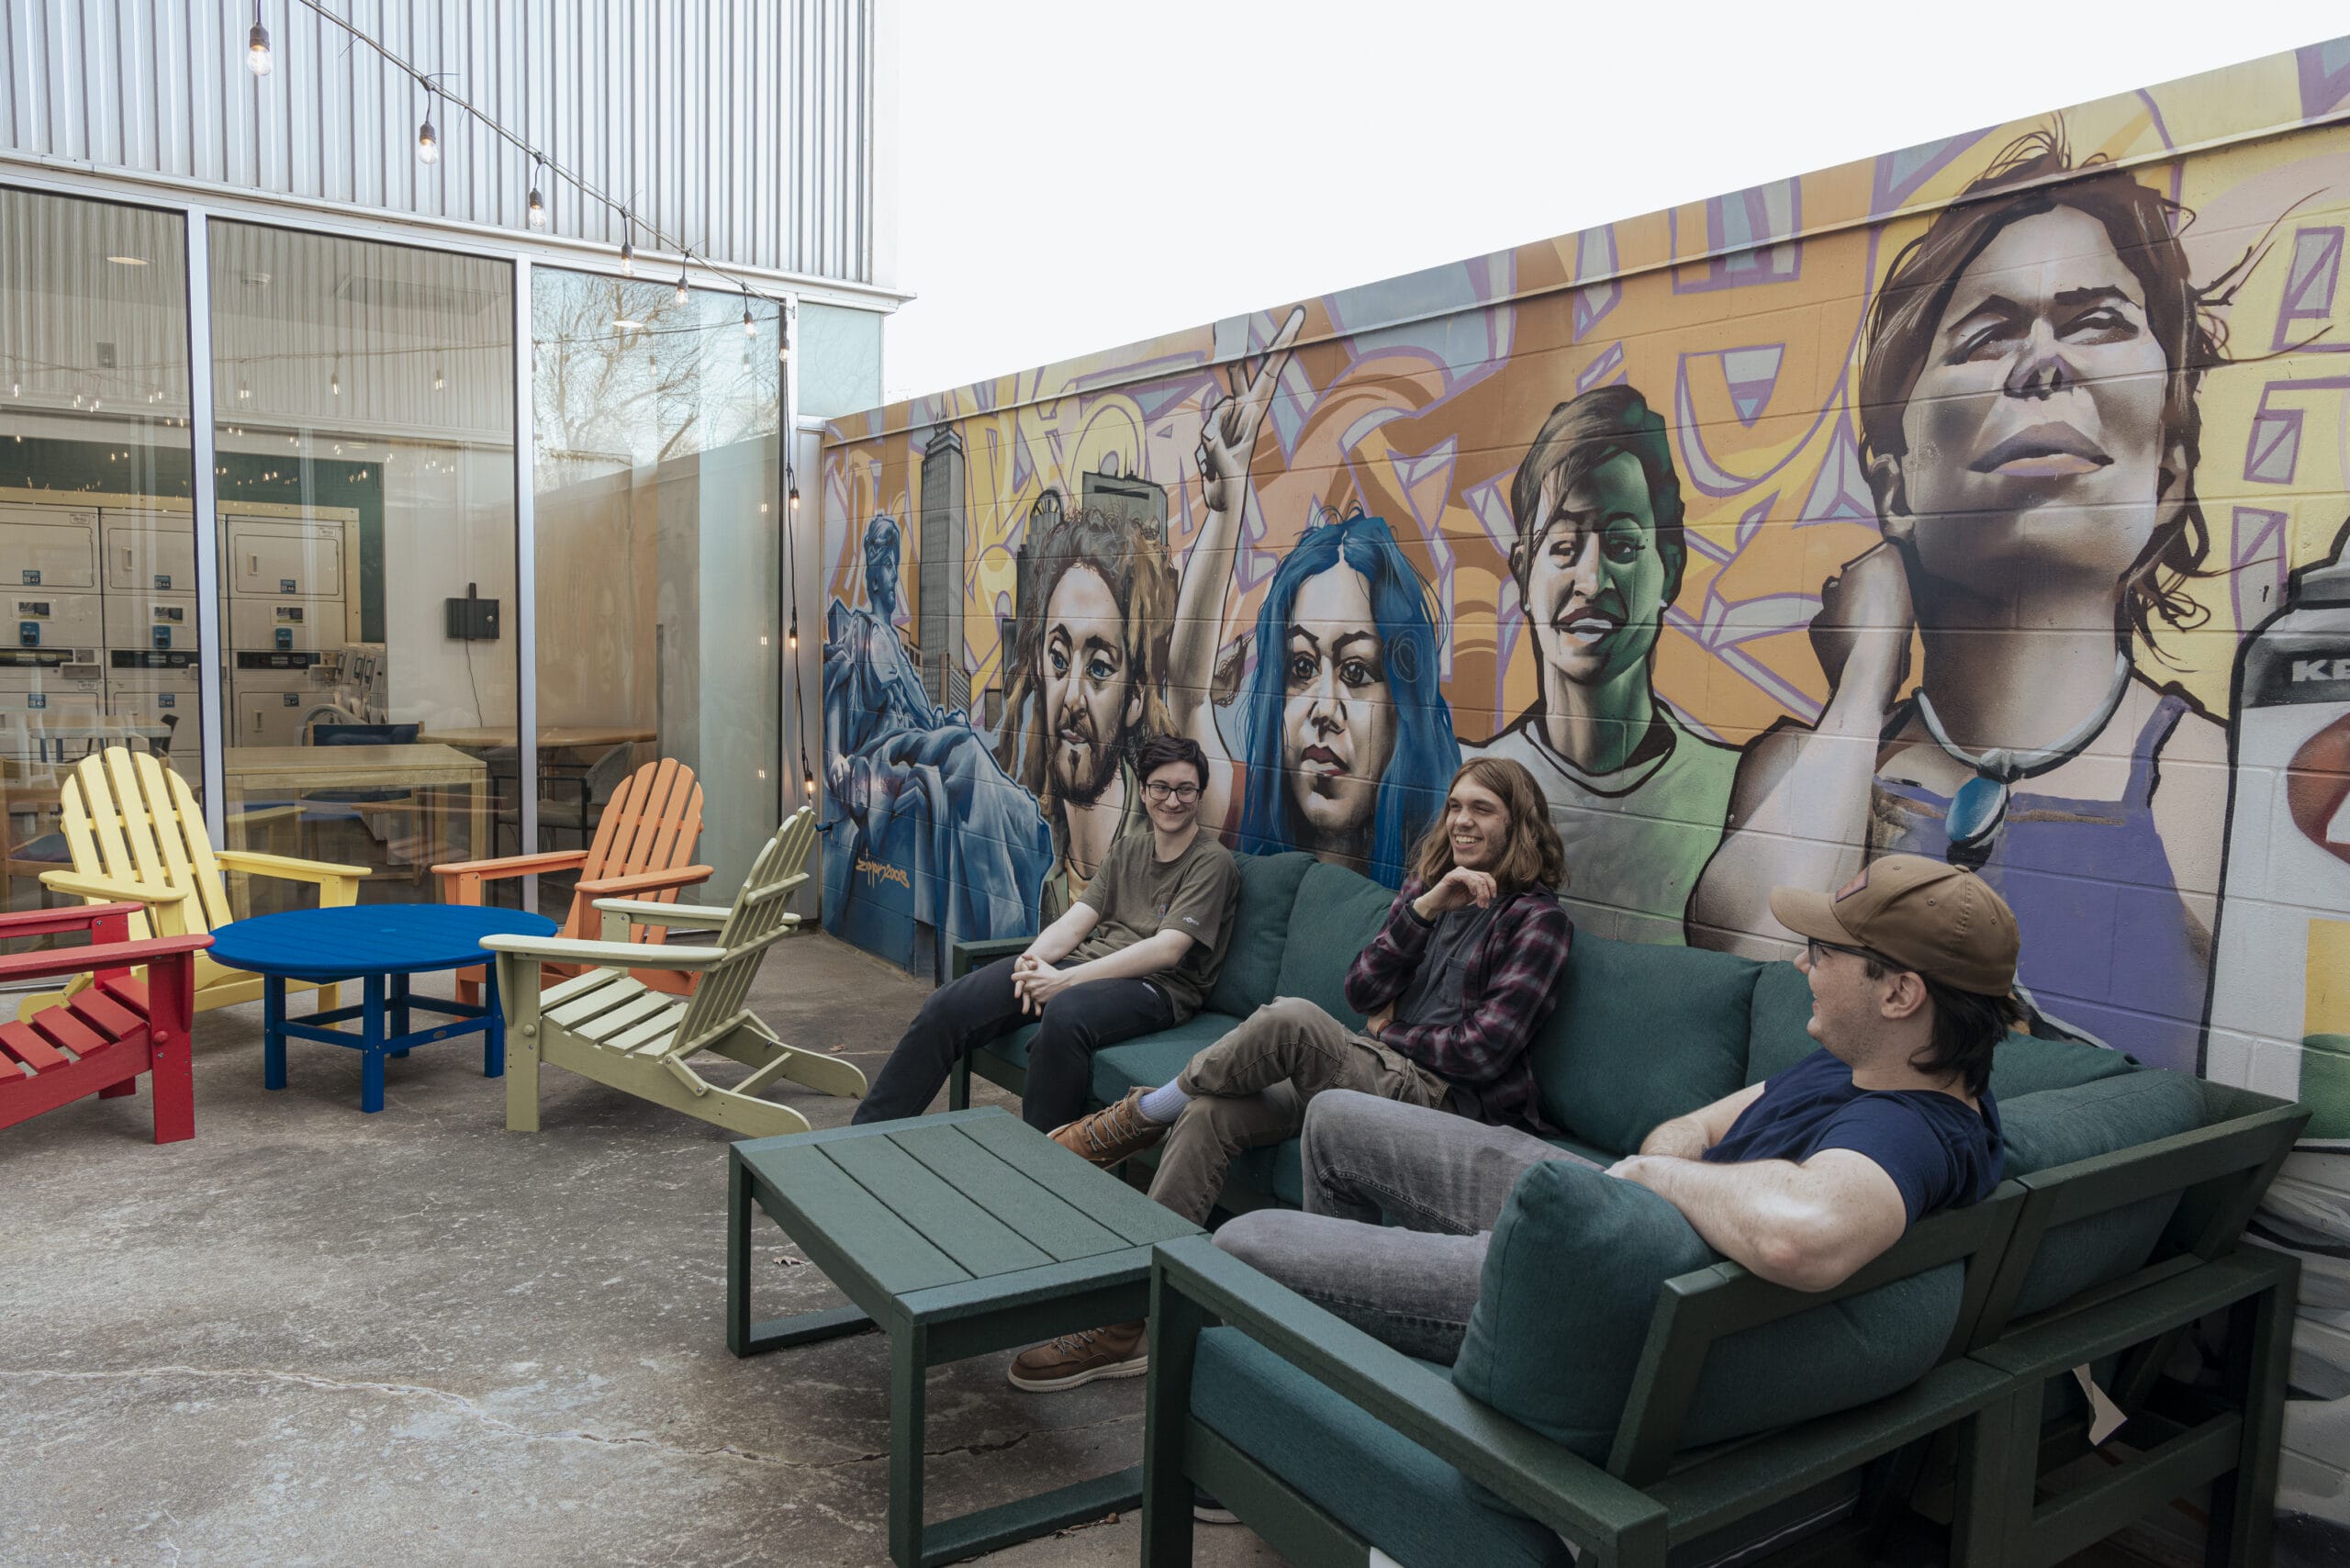 Students lounge in an outdoor courtyard on lounge furniture, with a mural of faces behind them.